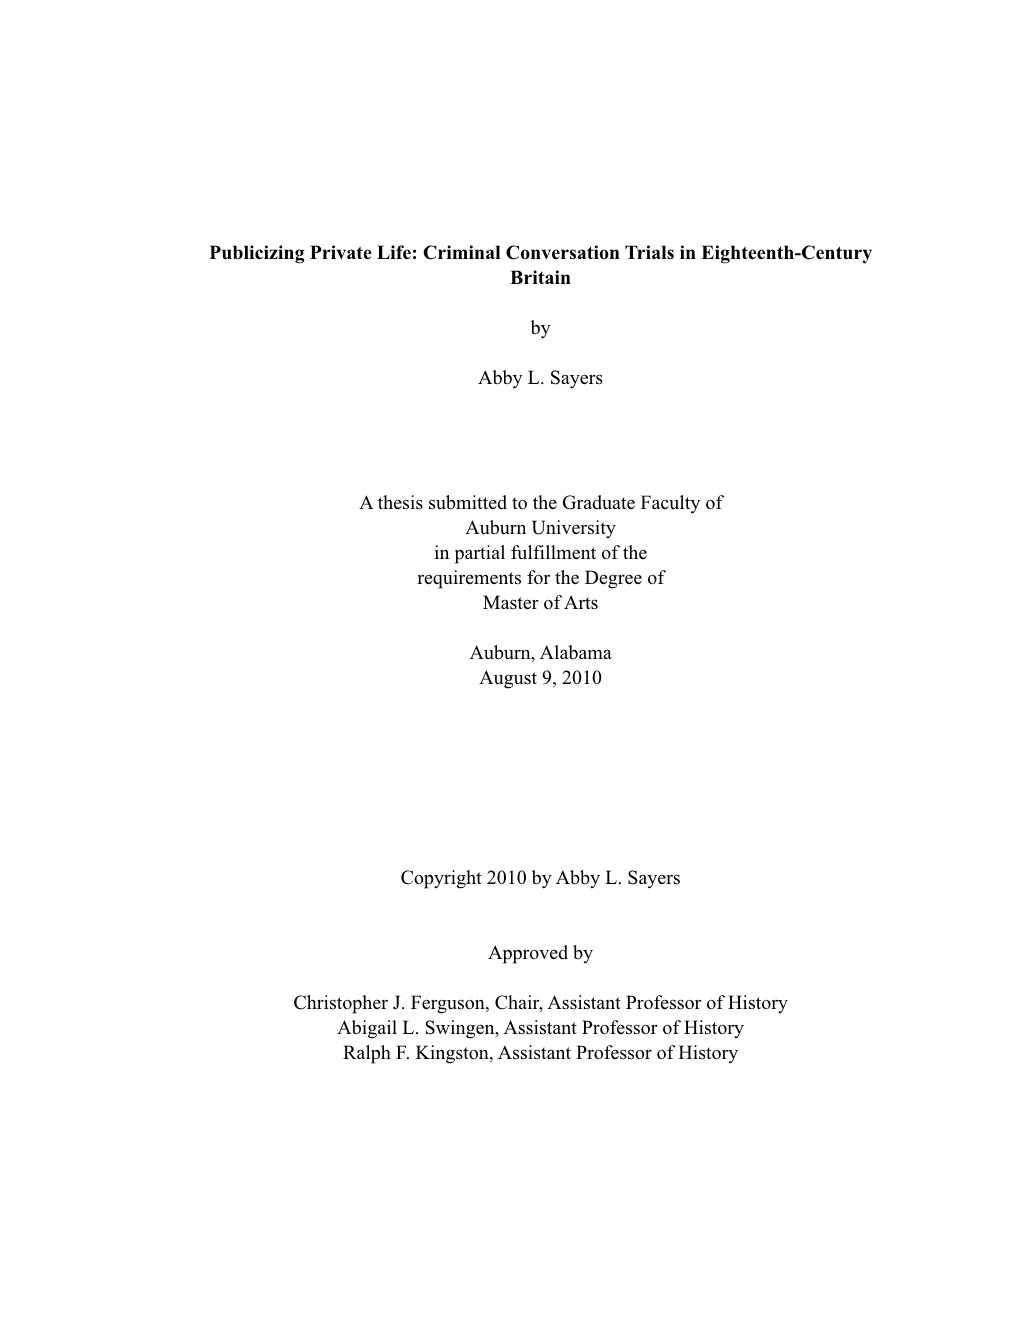 Publicizing Private Life: Criminal Conversation Trials in Eighteenth-Century Britain by Abby L. Sayers a Thesis Submitted To